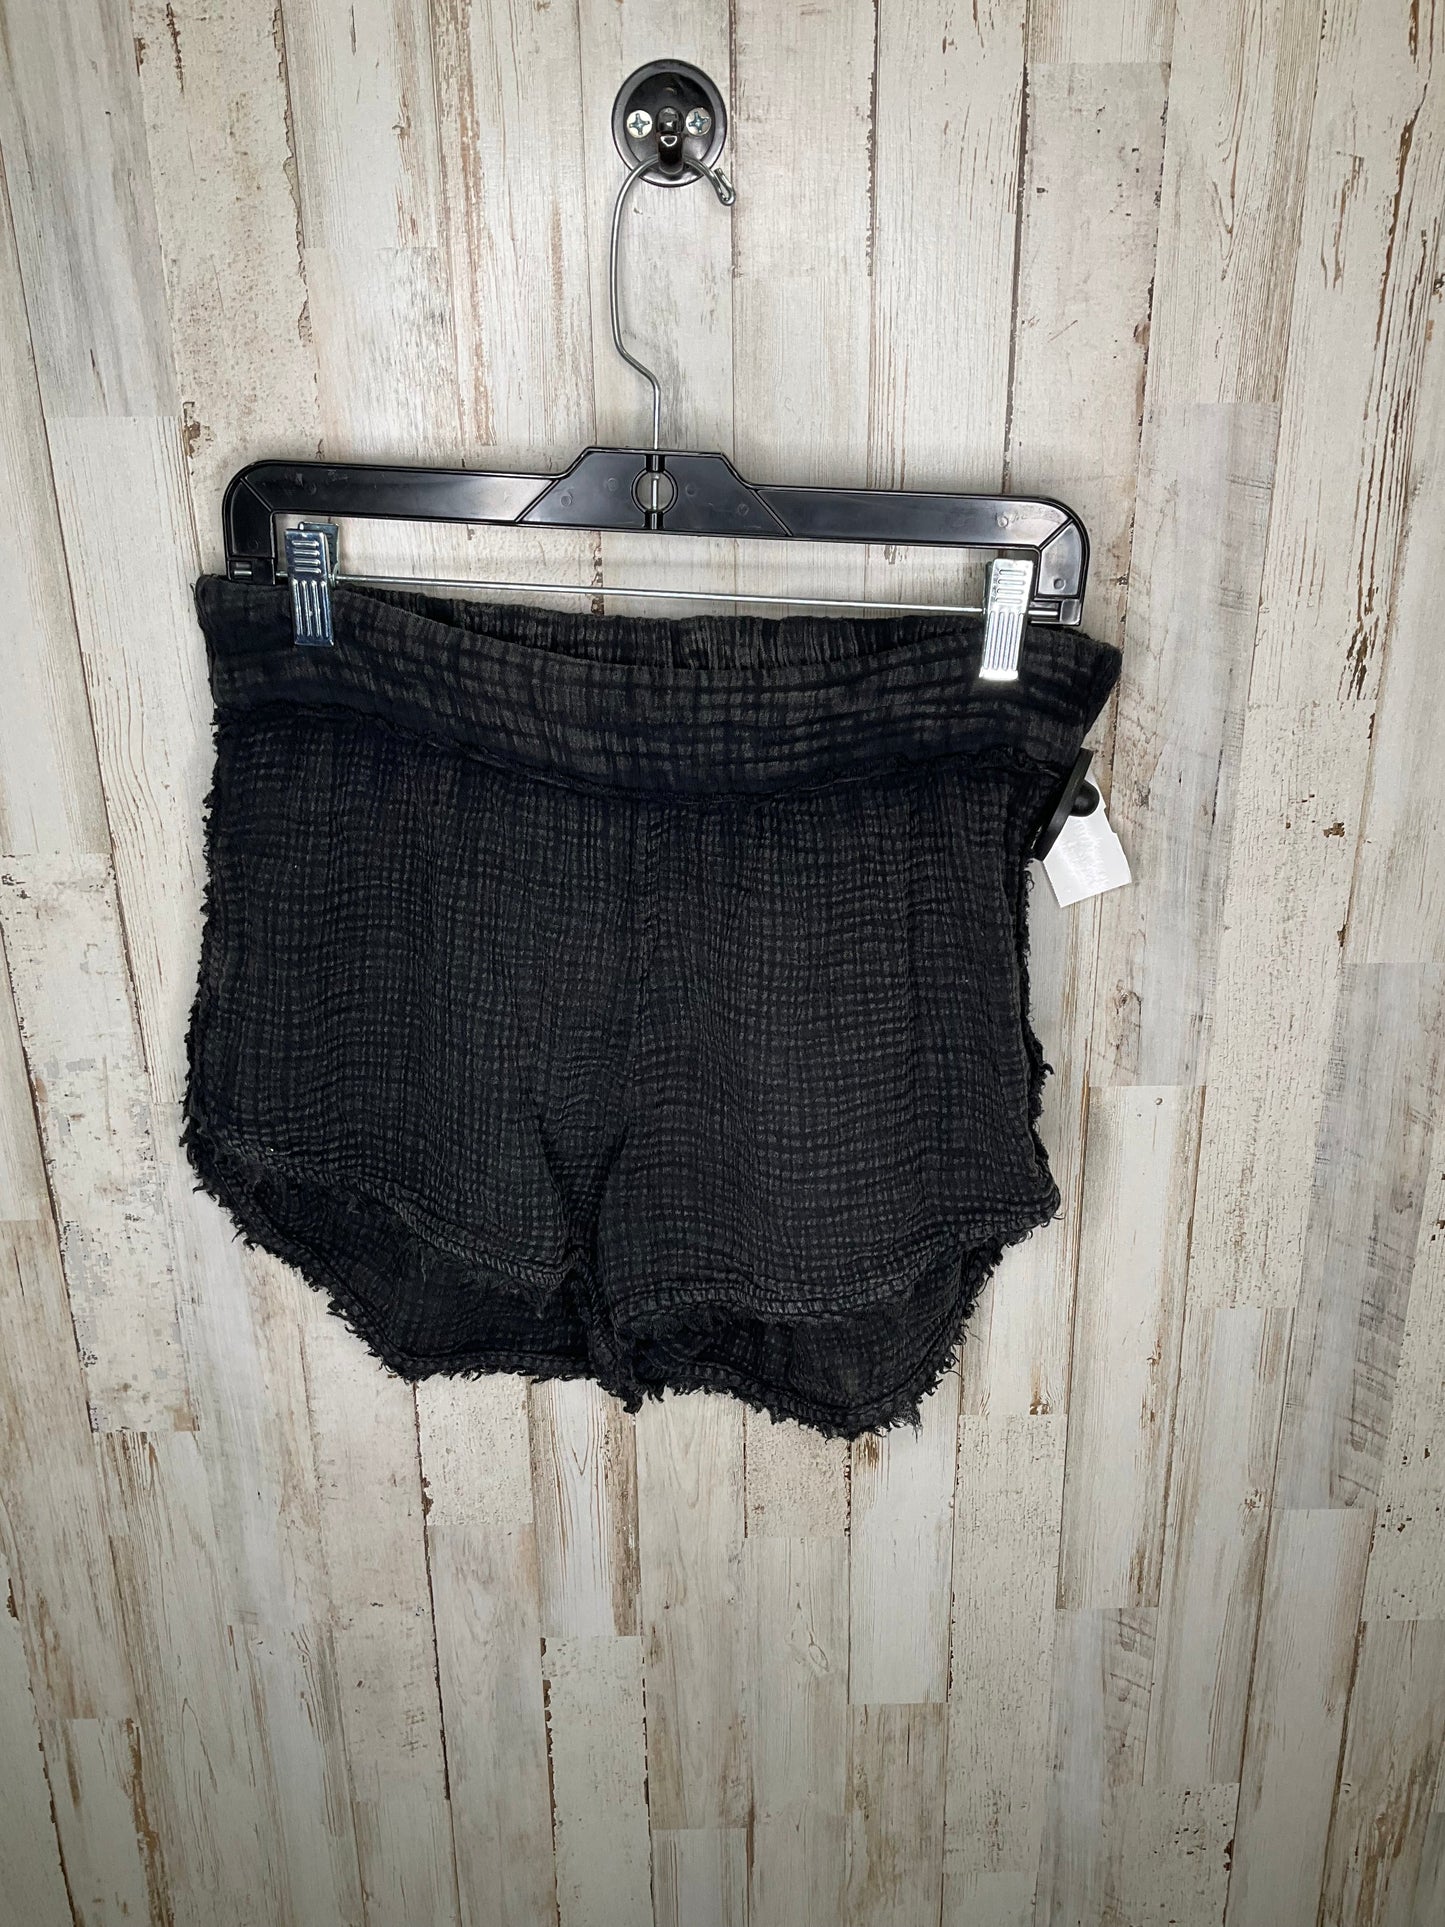 Black Shorts Daily Practice By Anthropologie, Size M